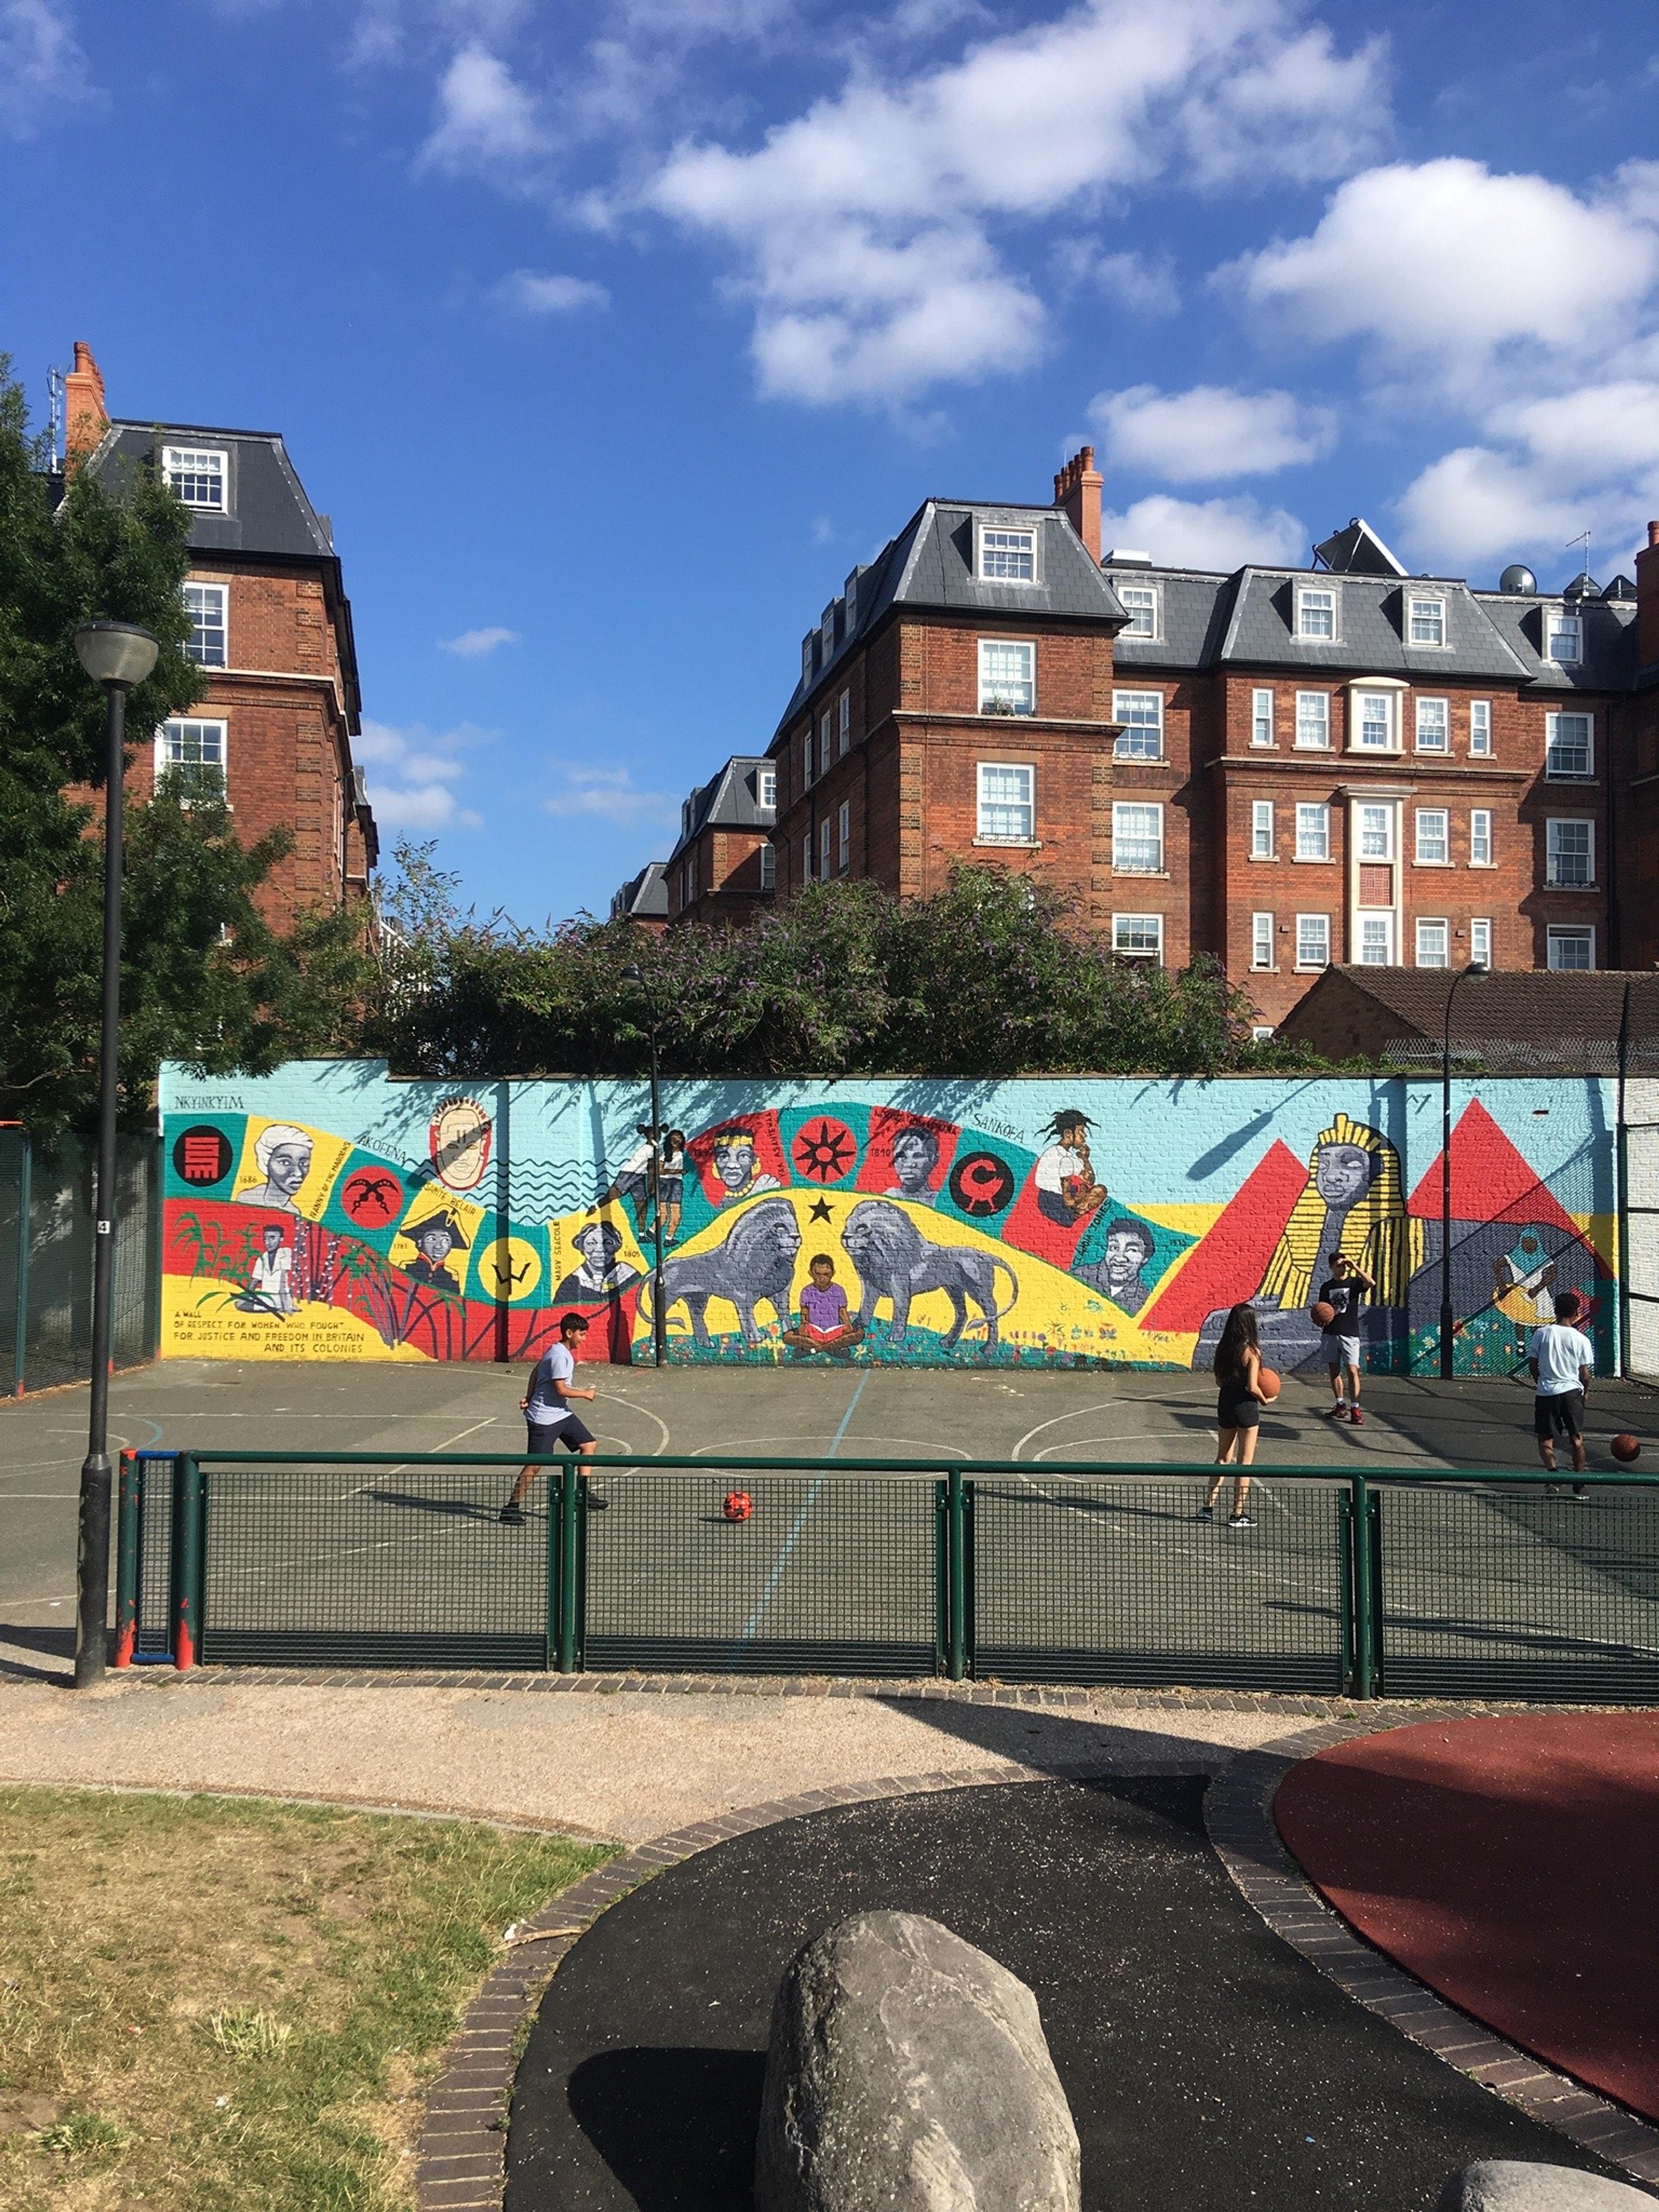 Photograph of a people playing ball games in a park with a mural on the wall in the background. There are tall buildings in the background.